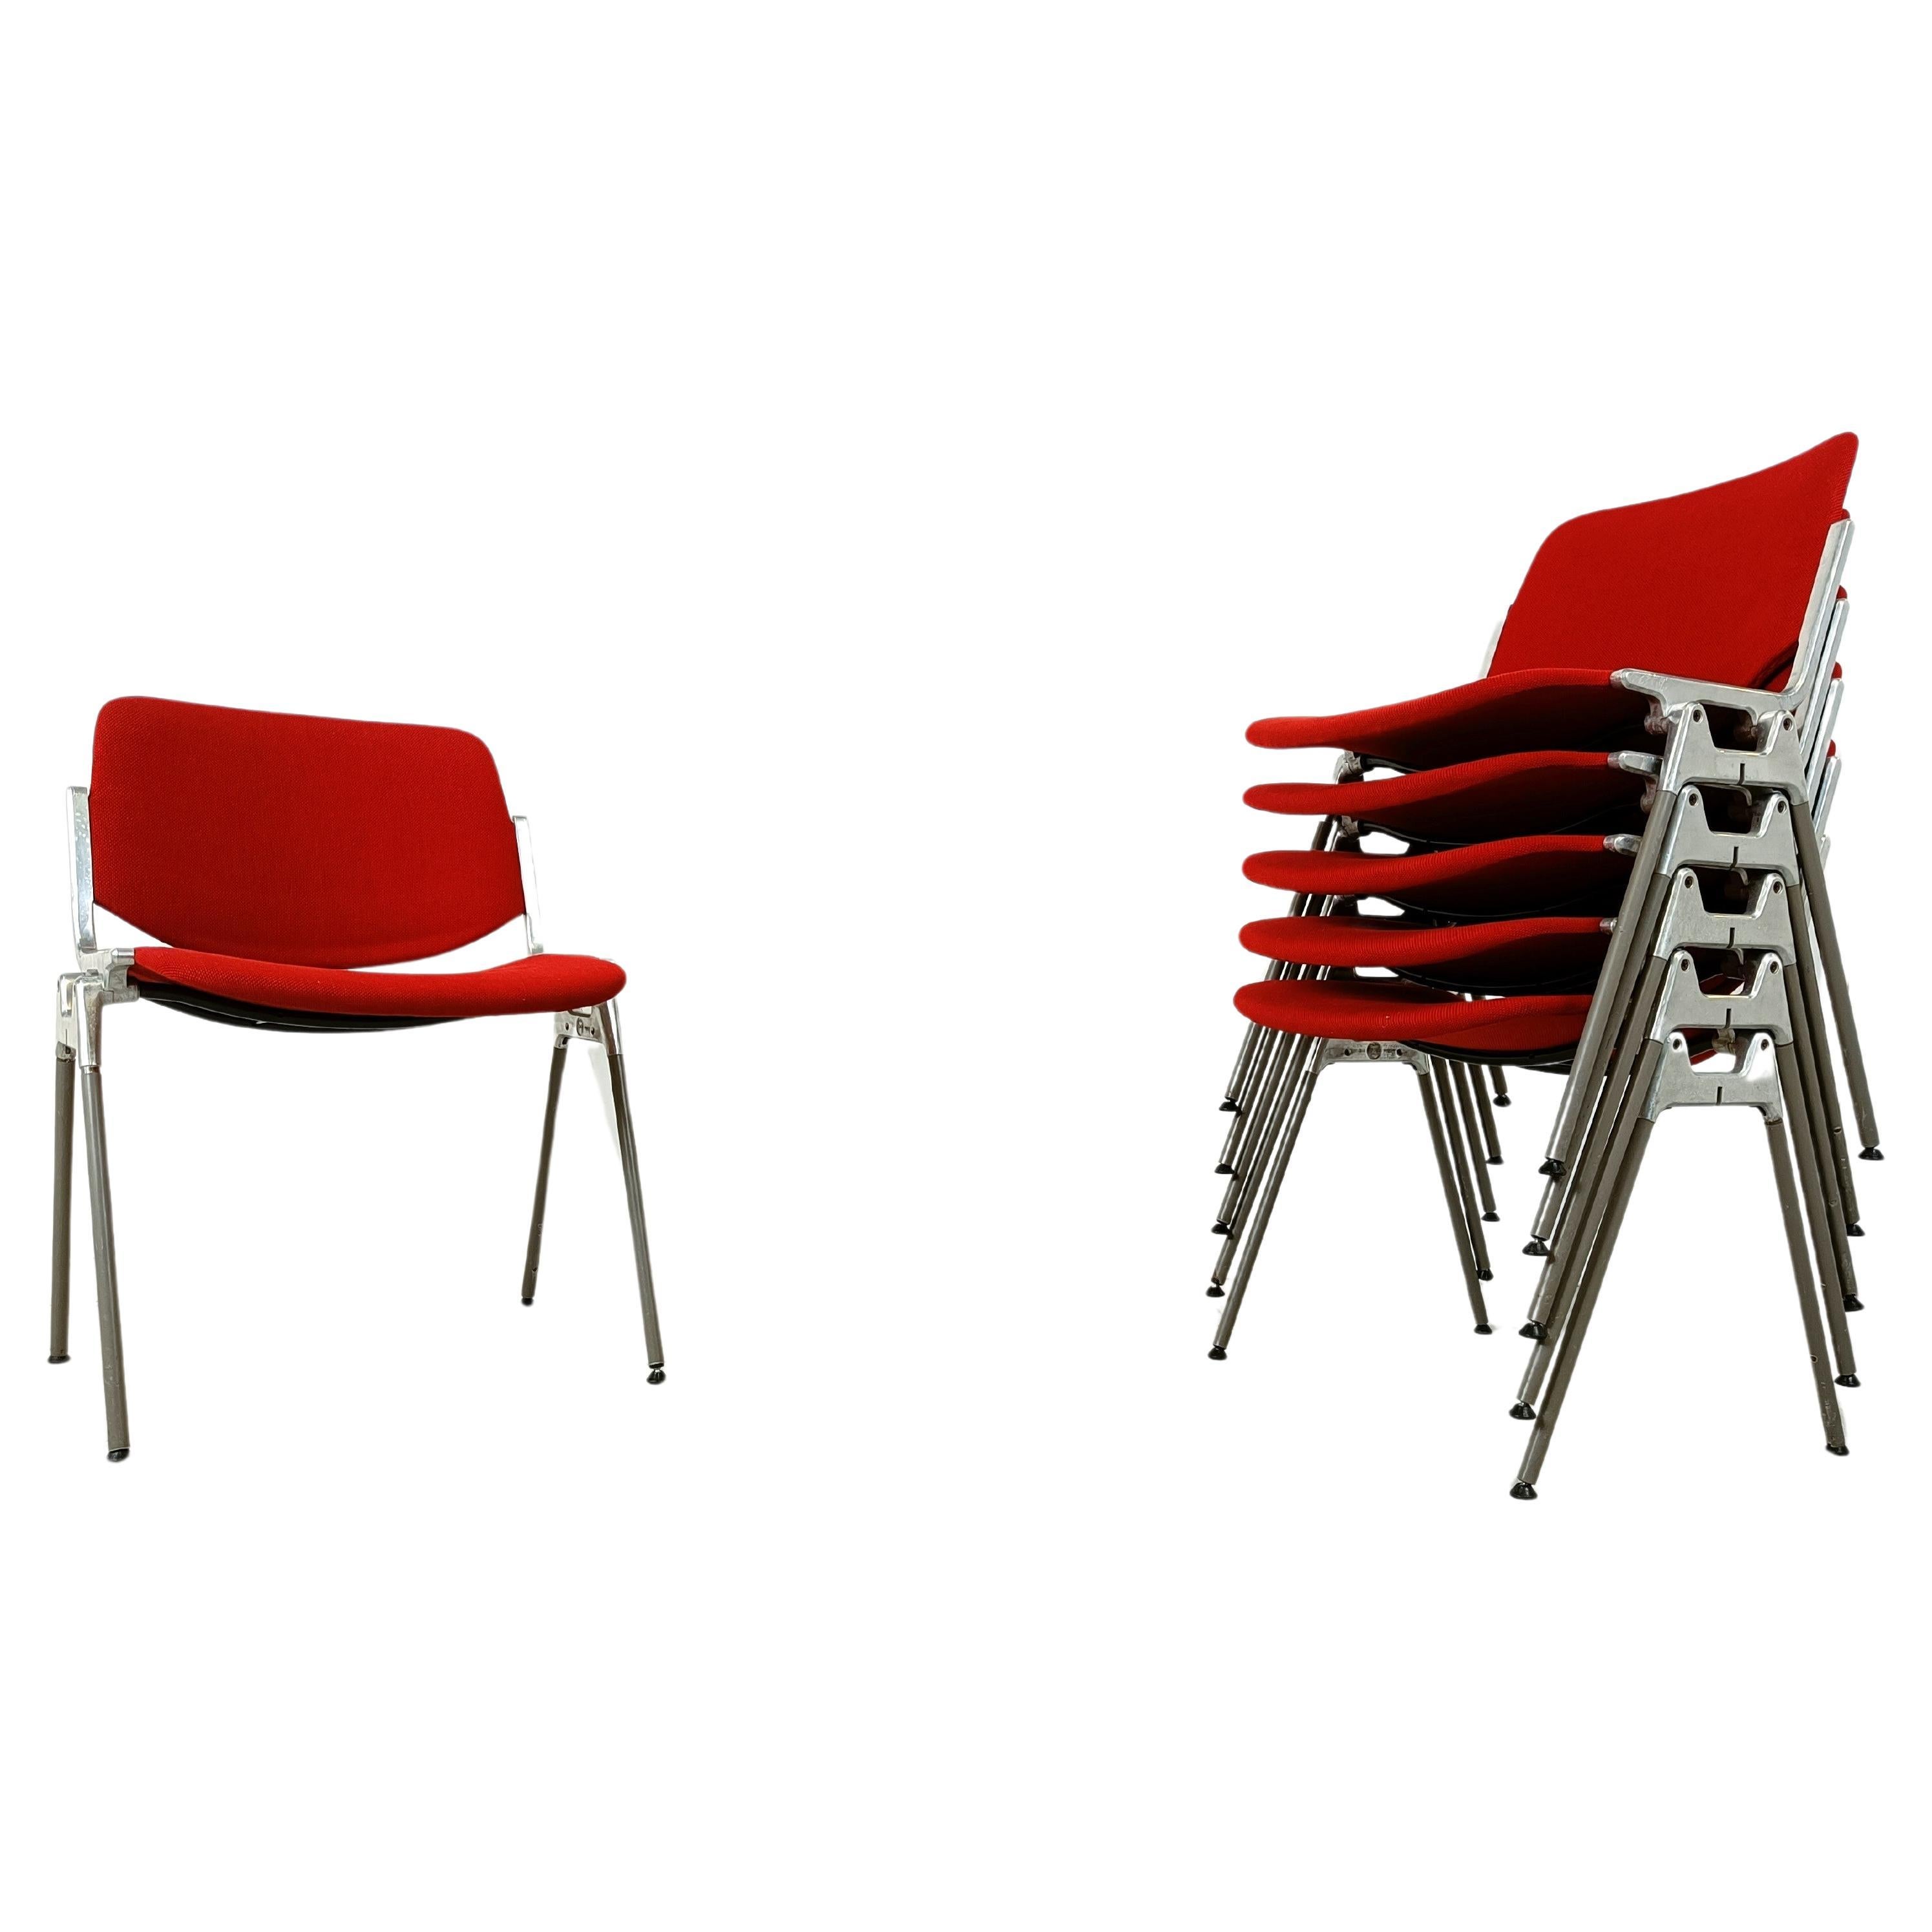 Vintage DSC 106 Side Chairs by Giancarlo Piretti for Castelli, 1970s For Sale